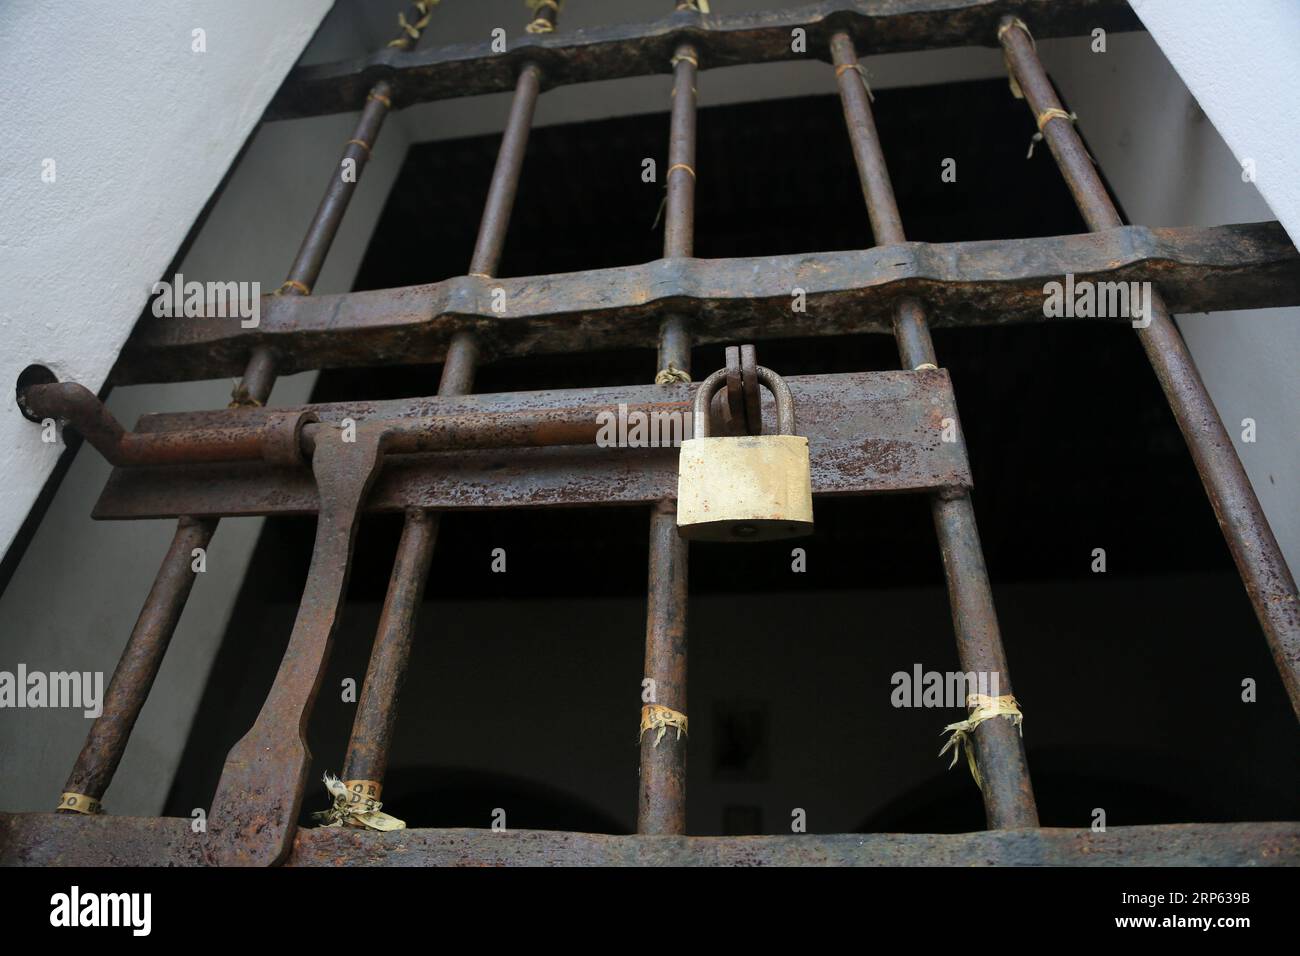 salvador, bahia, brazil - may 8, 2023: grid of a prison cell in a military fort in the city of Salvador. Stock Photo